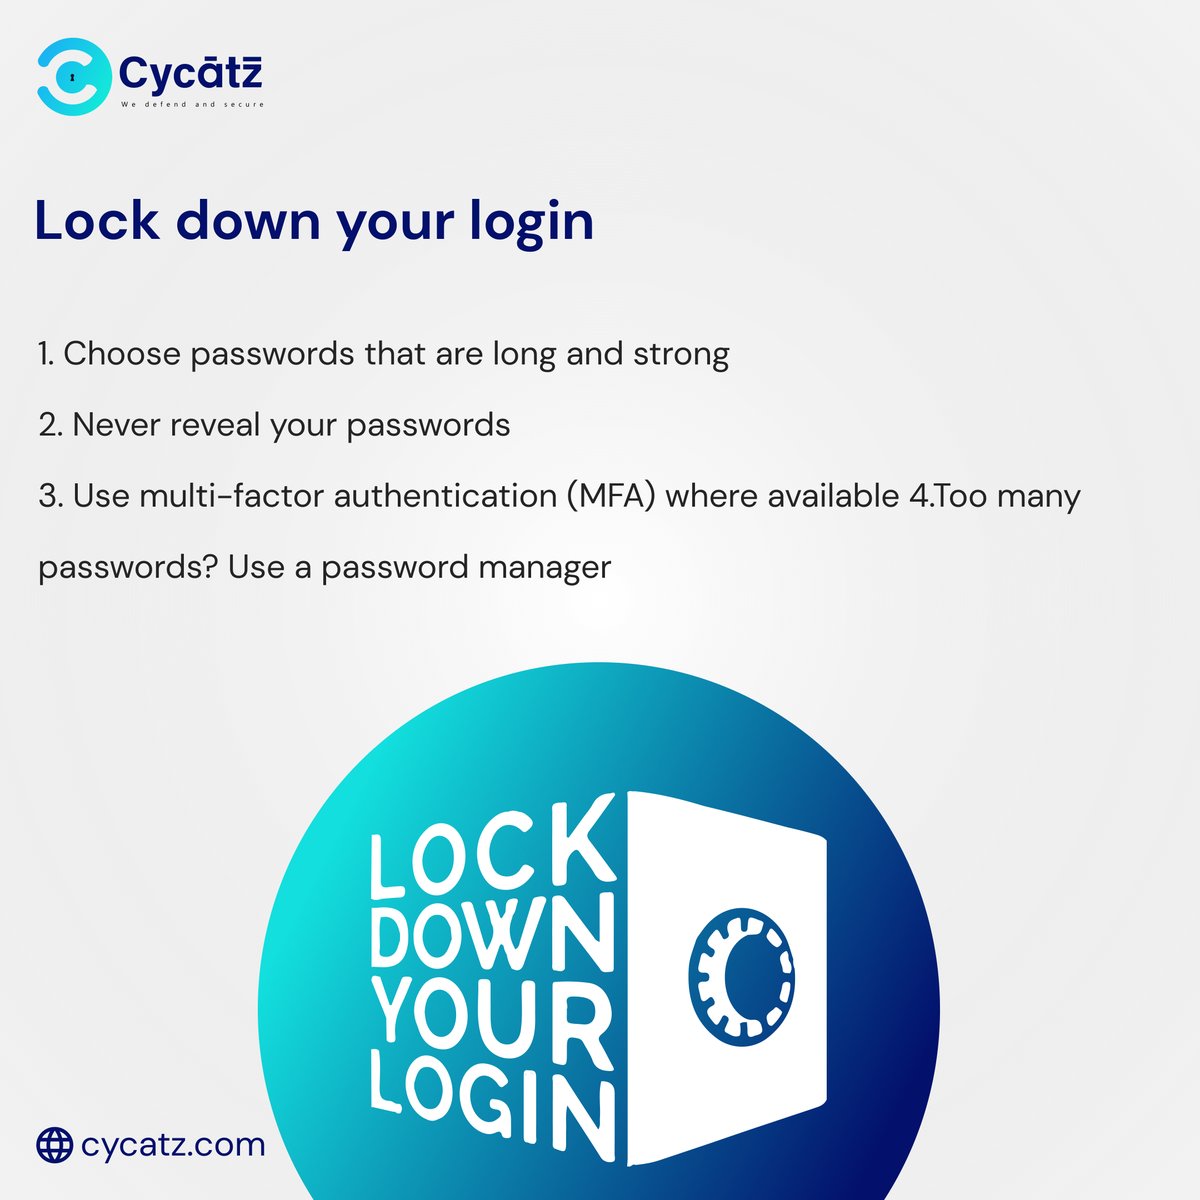 #CyCatz #cybersecurity Lock down your login

 #darkwebmonitoring #SurfaceWebMonitoring #mobilesecurity #emailsecurity #vendorriskmanagement #BrandMonitoring #cyber #security